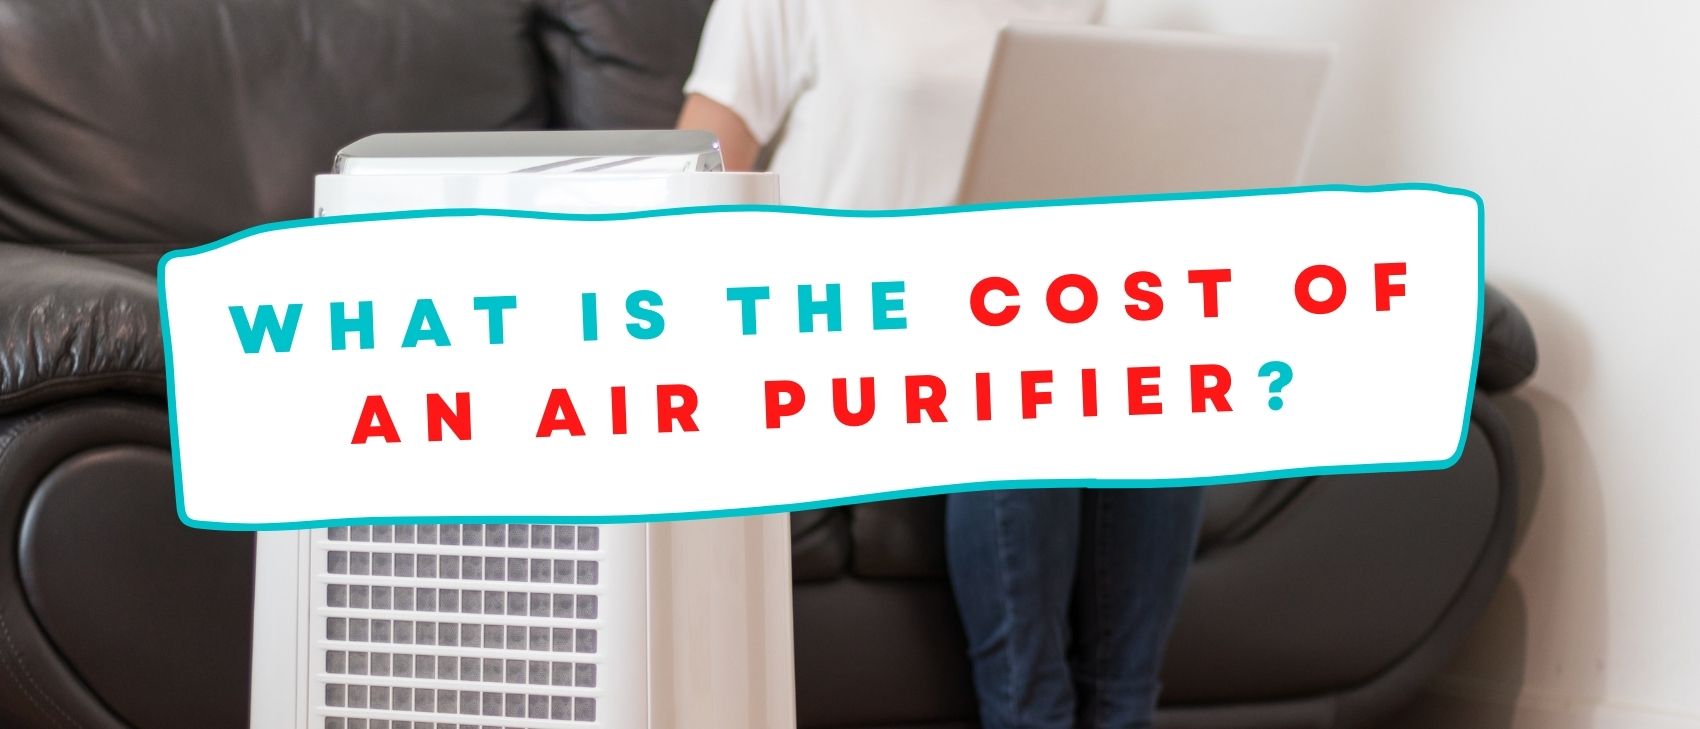 What Is the Cost of an Air Purifier?